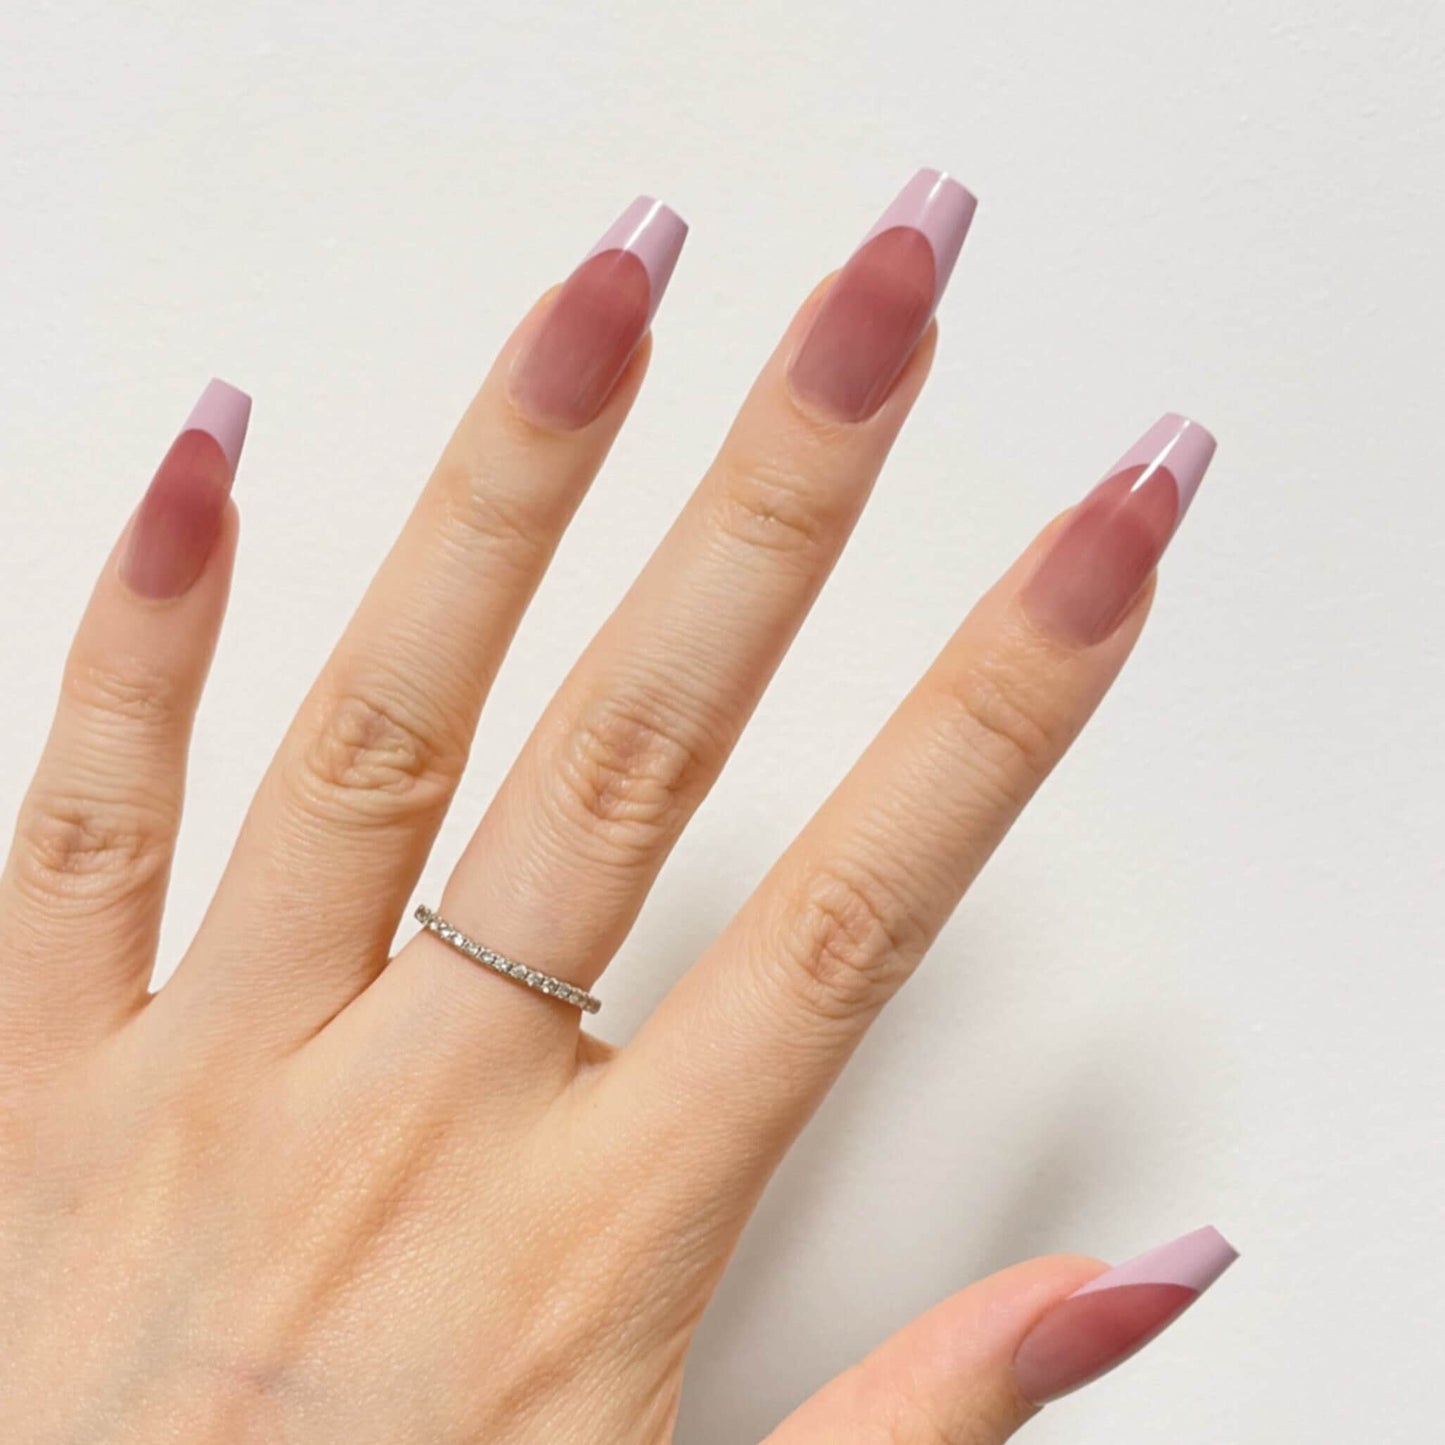 Rose Pink French Medium Square Pastel French Press On Nail